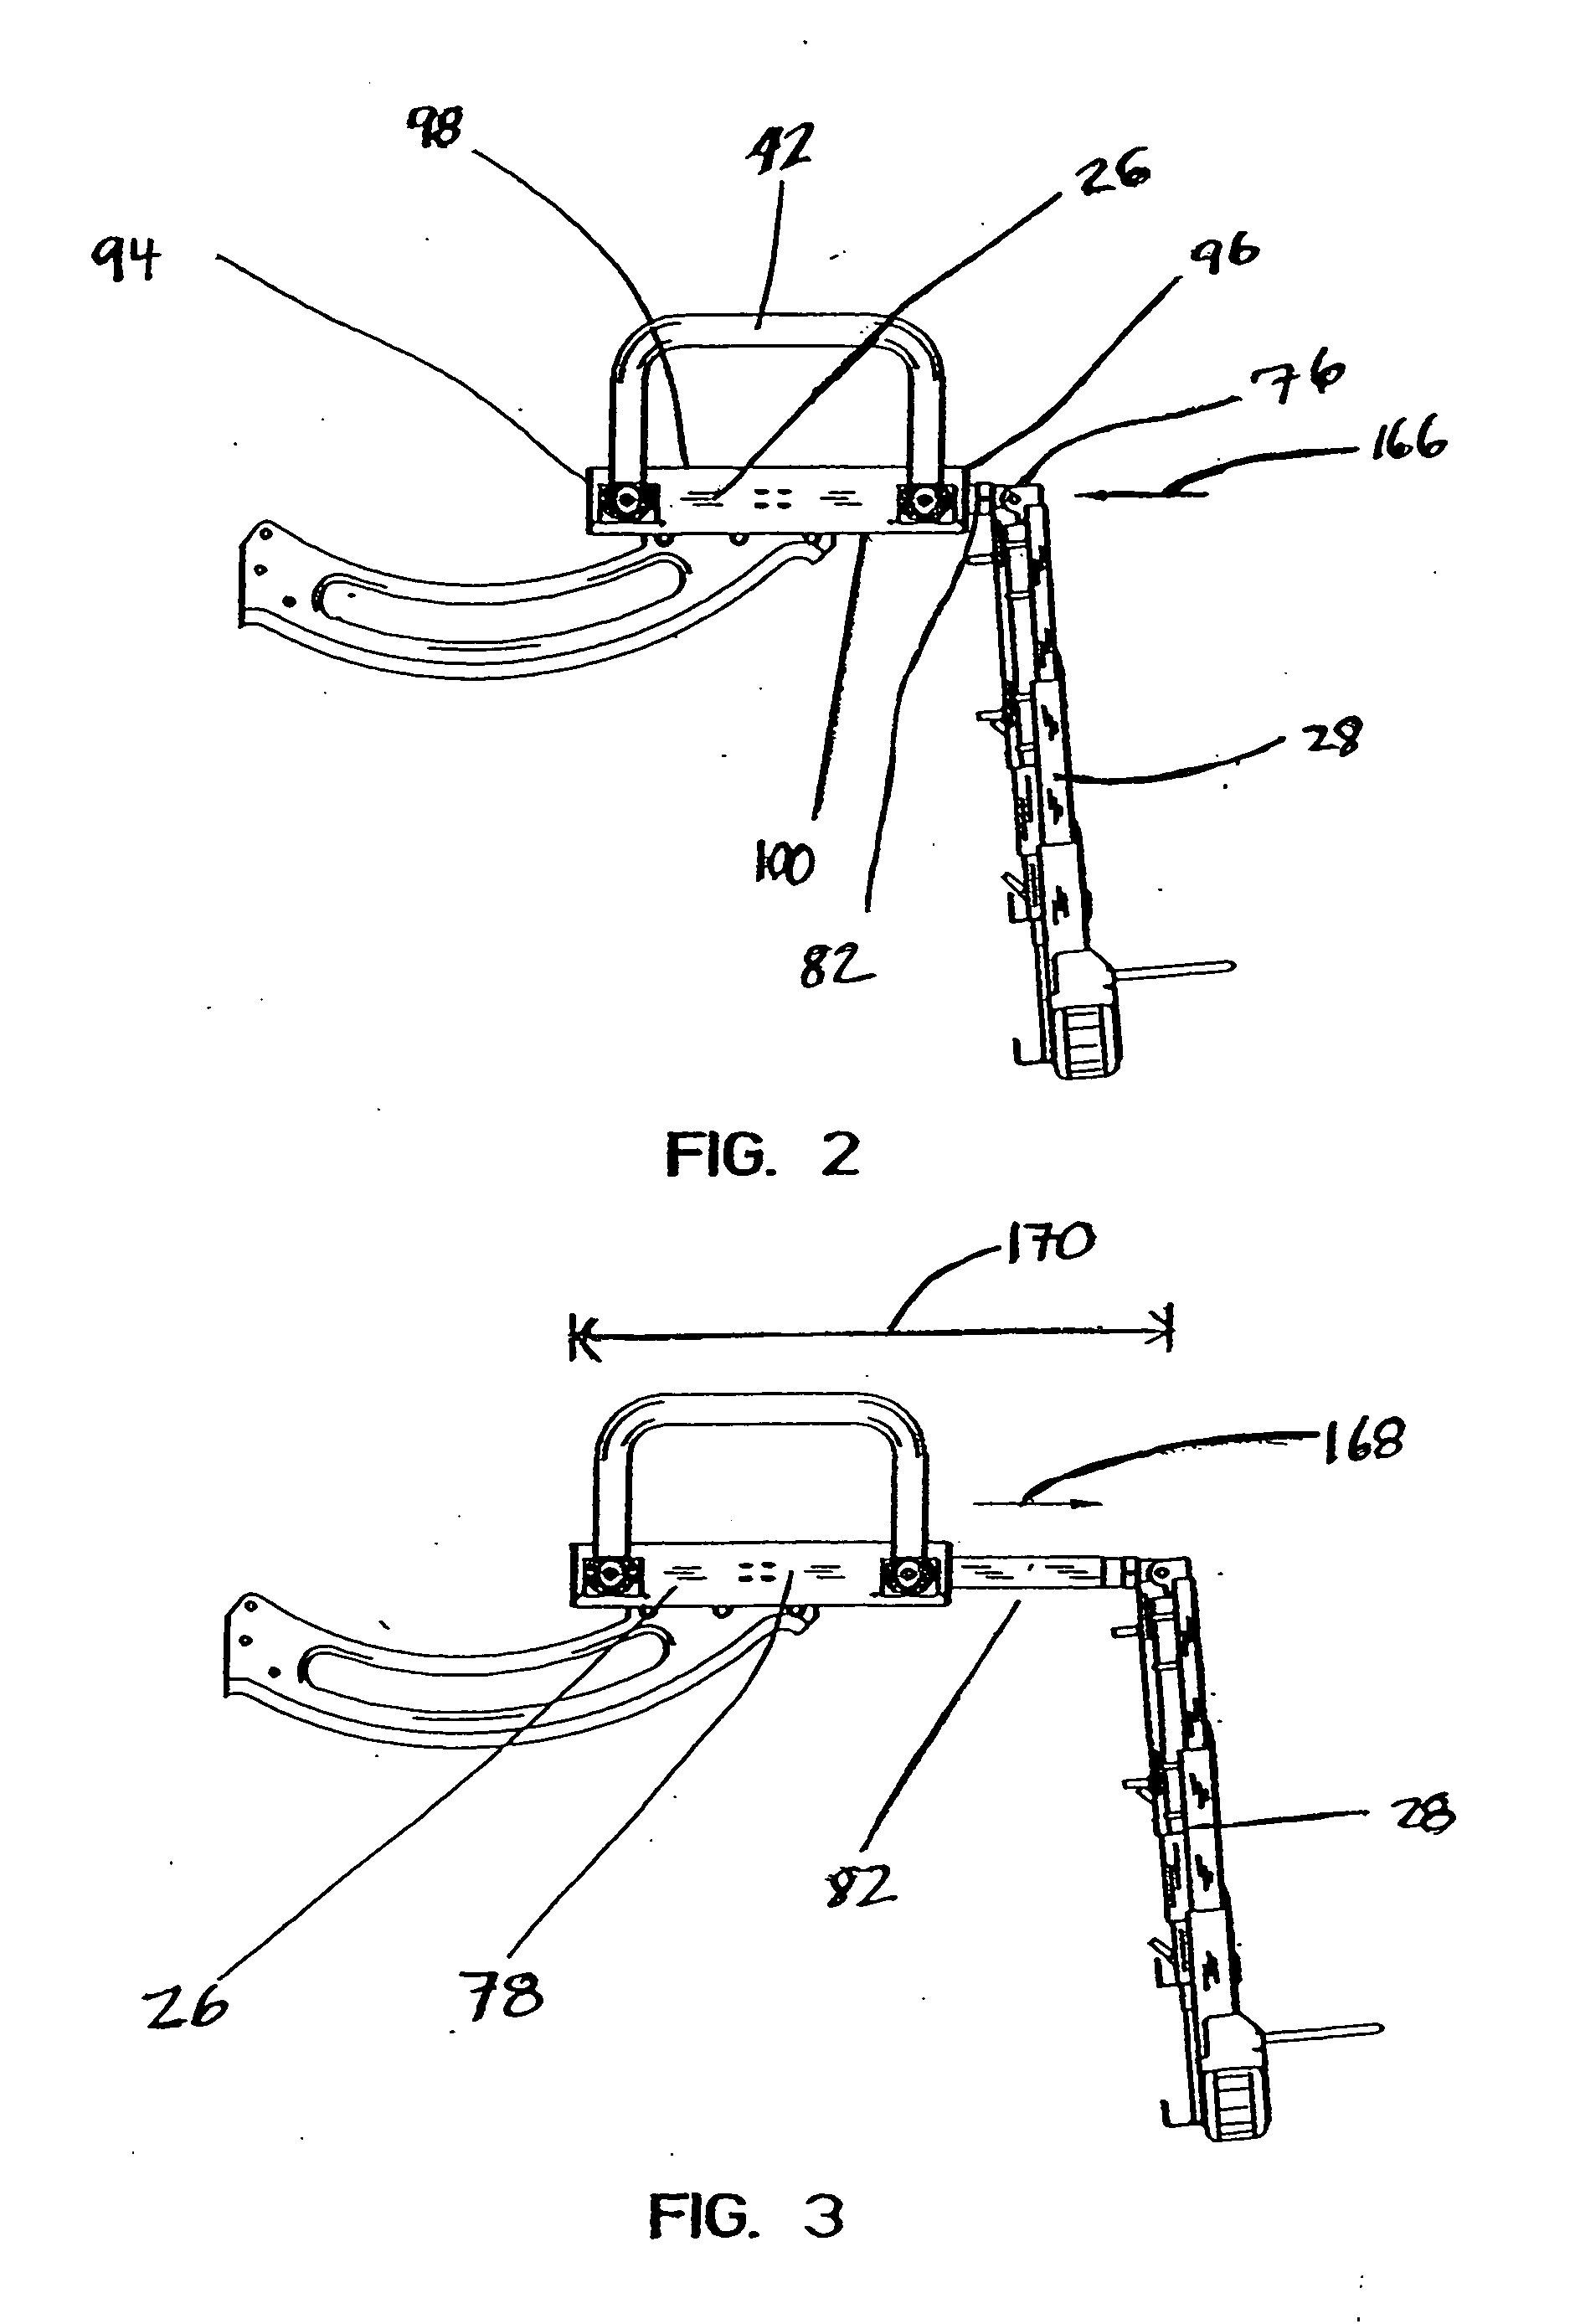 Patient support having an adjustable popliteal length apparatus, system and method